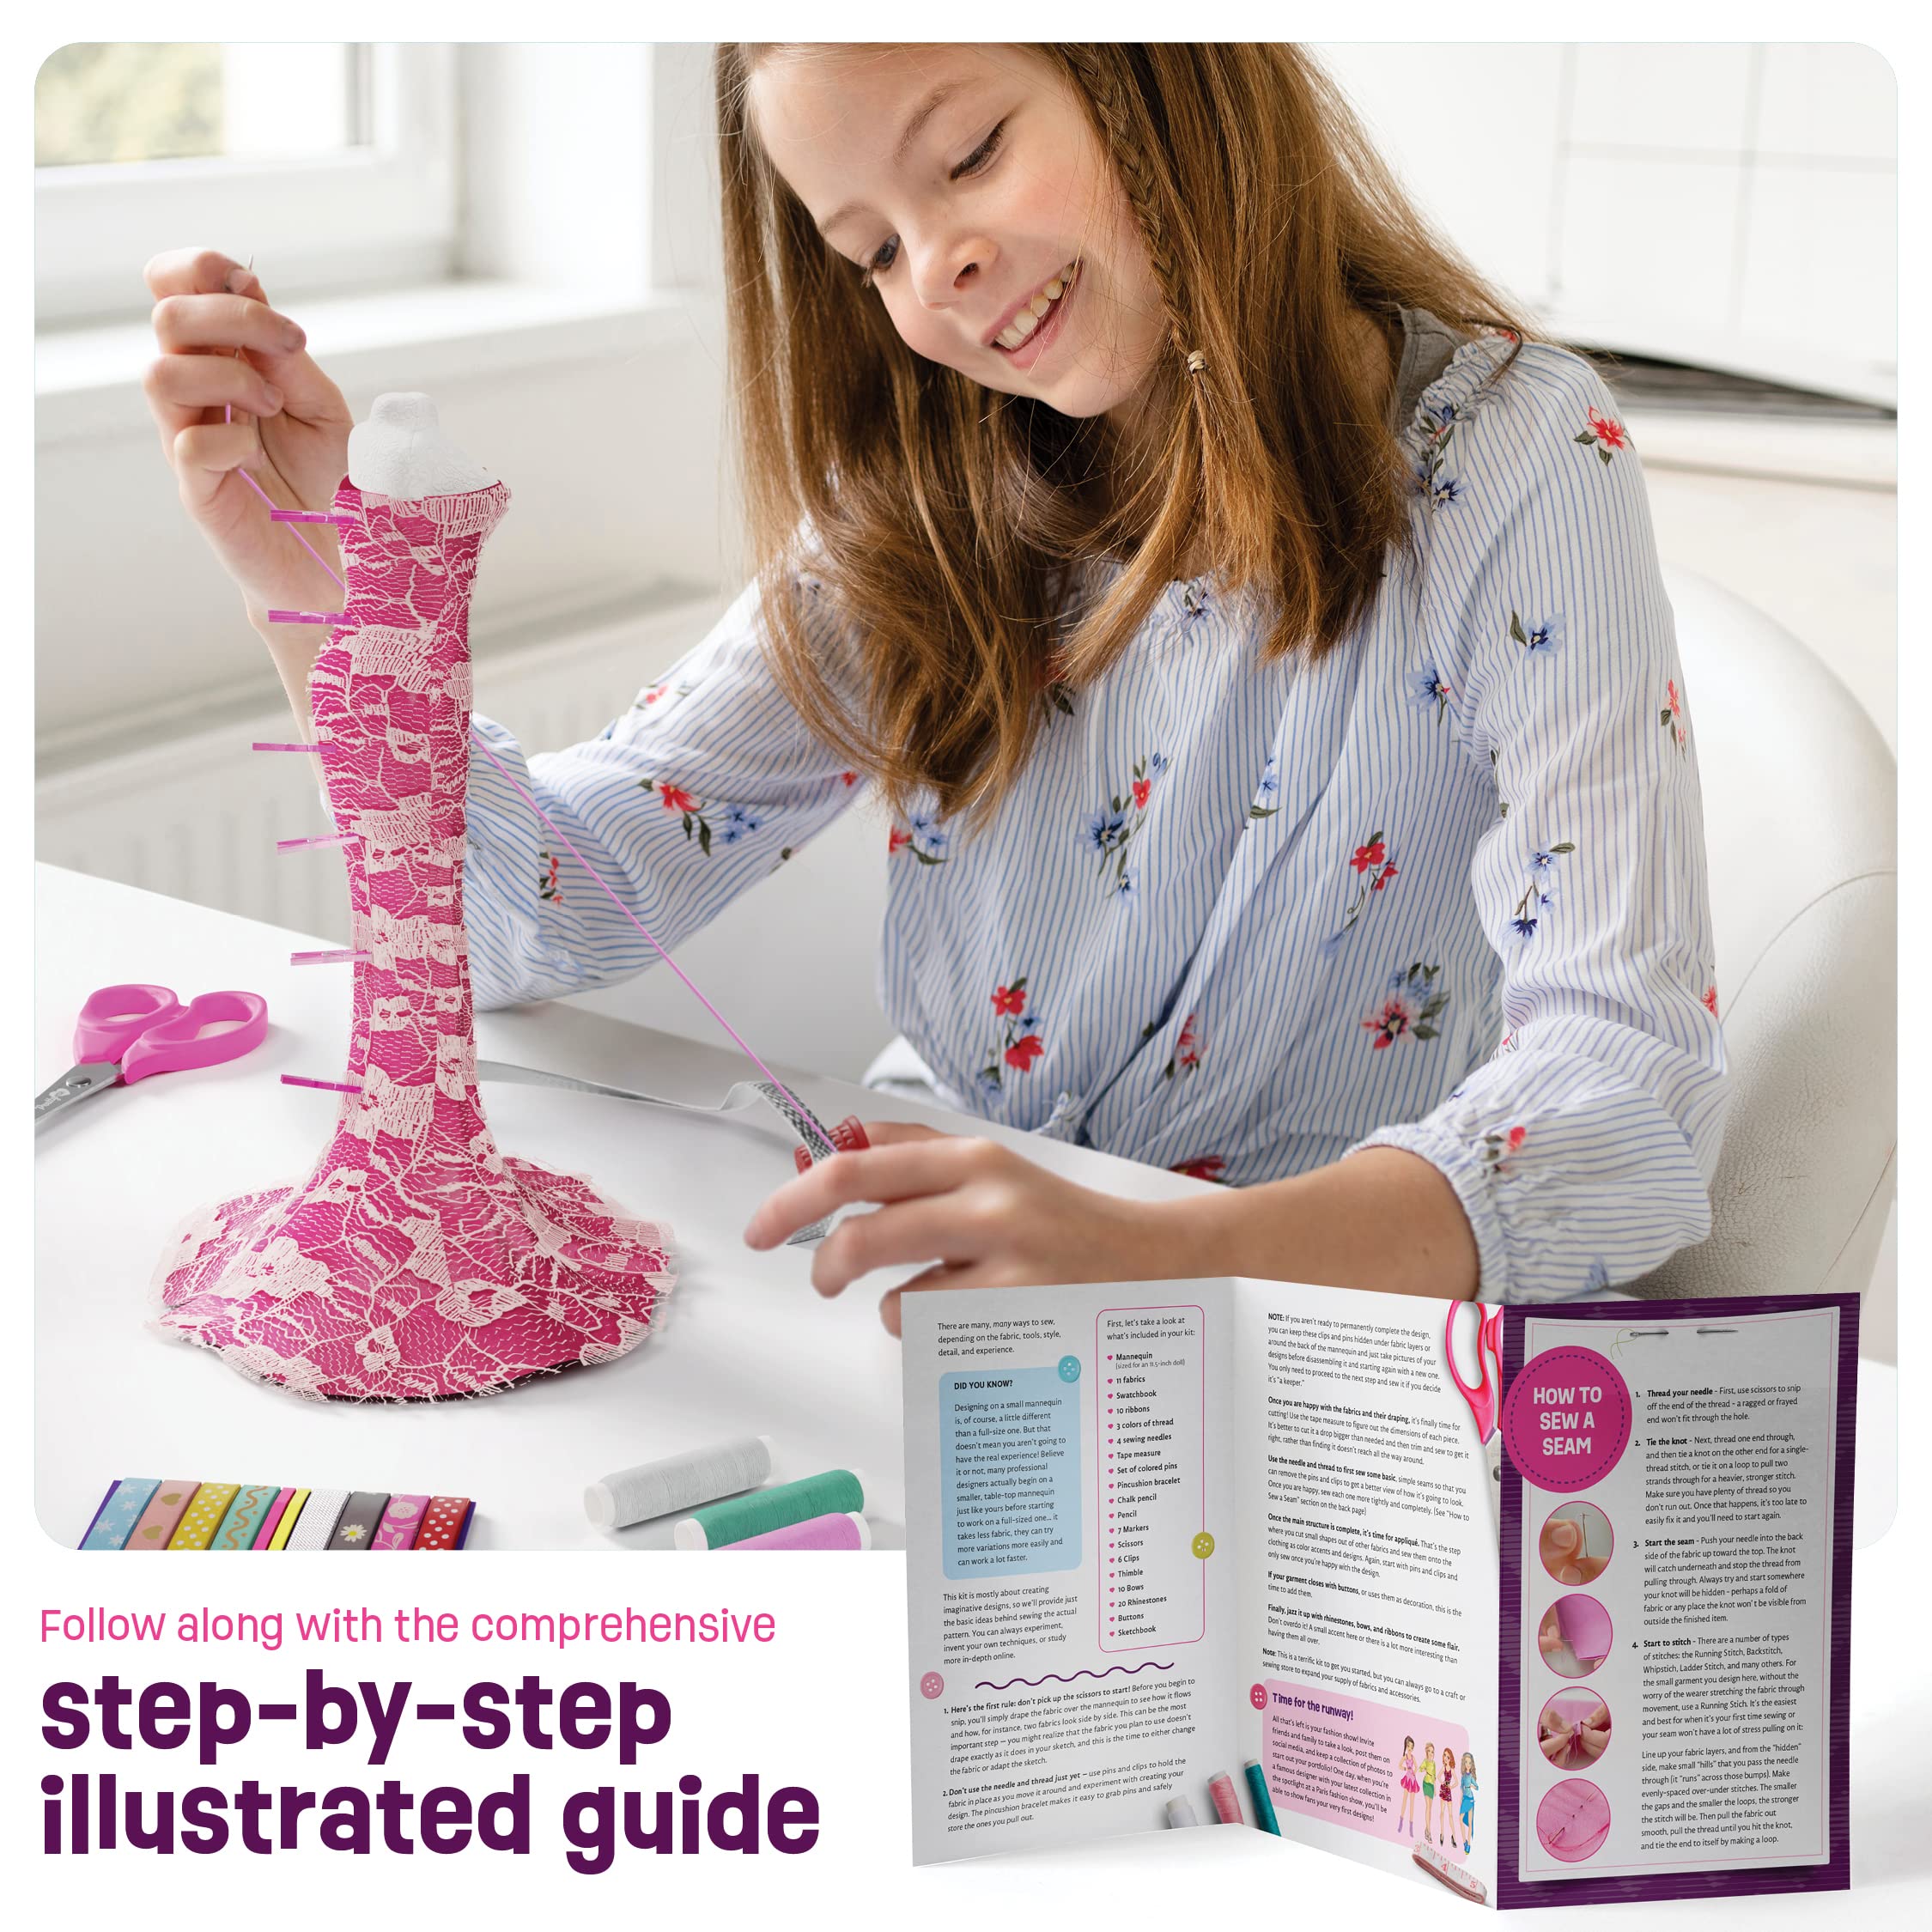 Fashion Design Studio - Sewing Kit for Kids - Girls Arts & Crafts Kits Age 6, 7, 8, 9, 10-12 - Learn to Sketch & Sew with Real Designer Sketchbook - Kid Art Project Gift - Girl Craft Activities Gifts